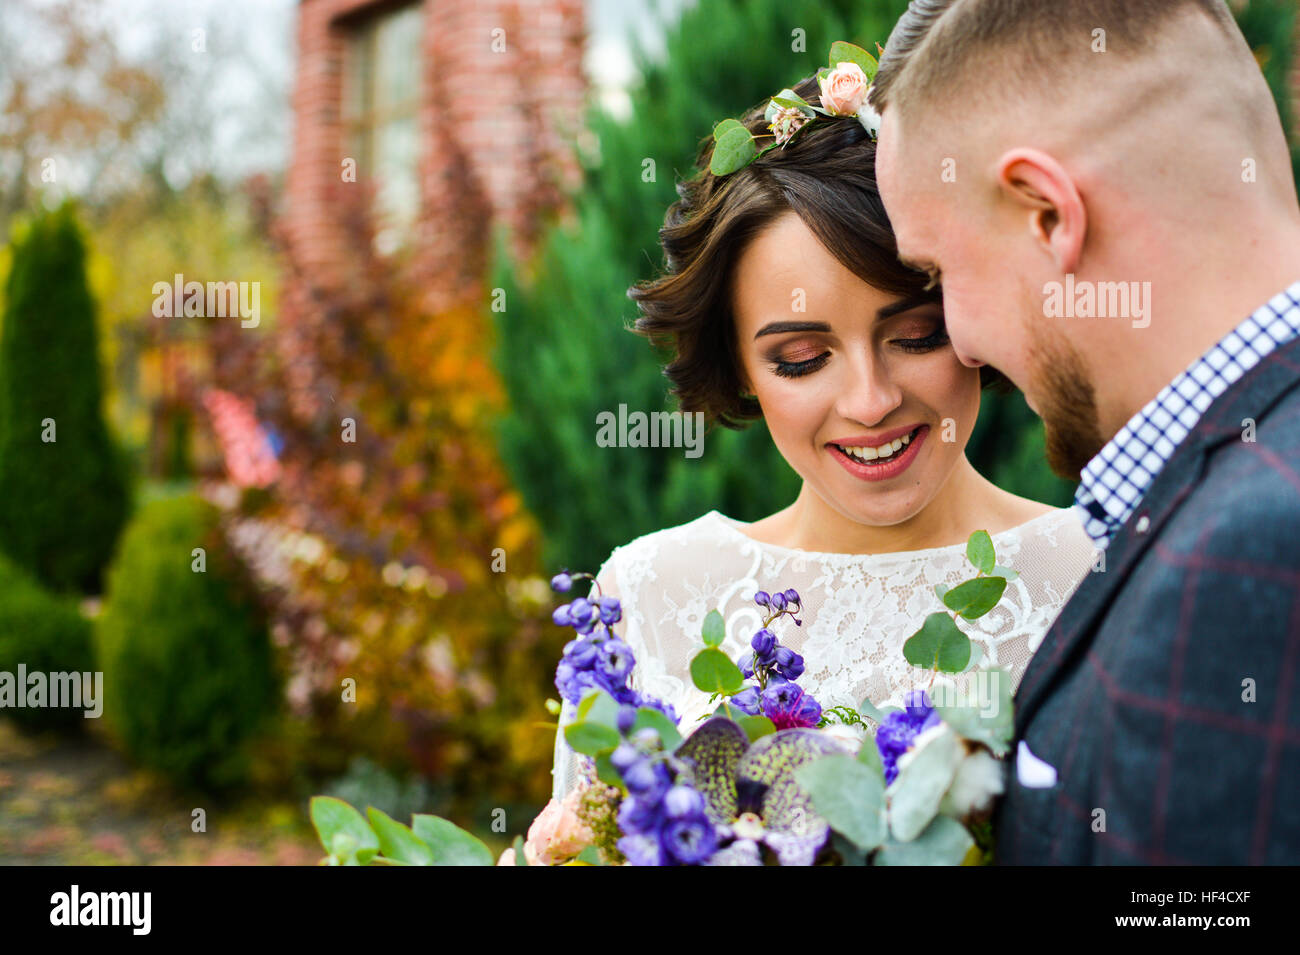 Portrait of emotional newlyweds groom and bride embracing  holding each other hands. In yard against house in autumn season. Stock Photo